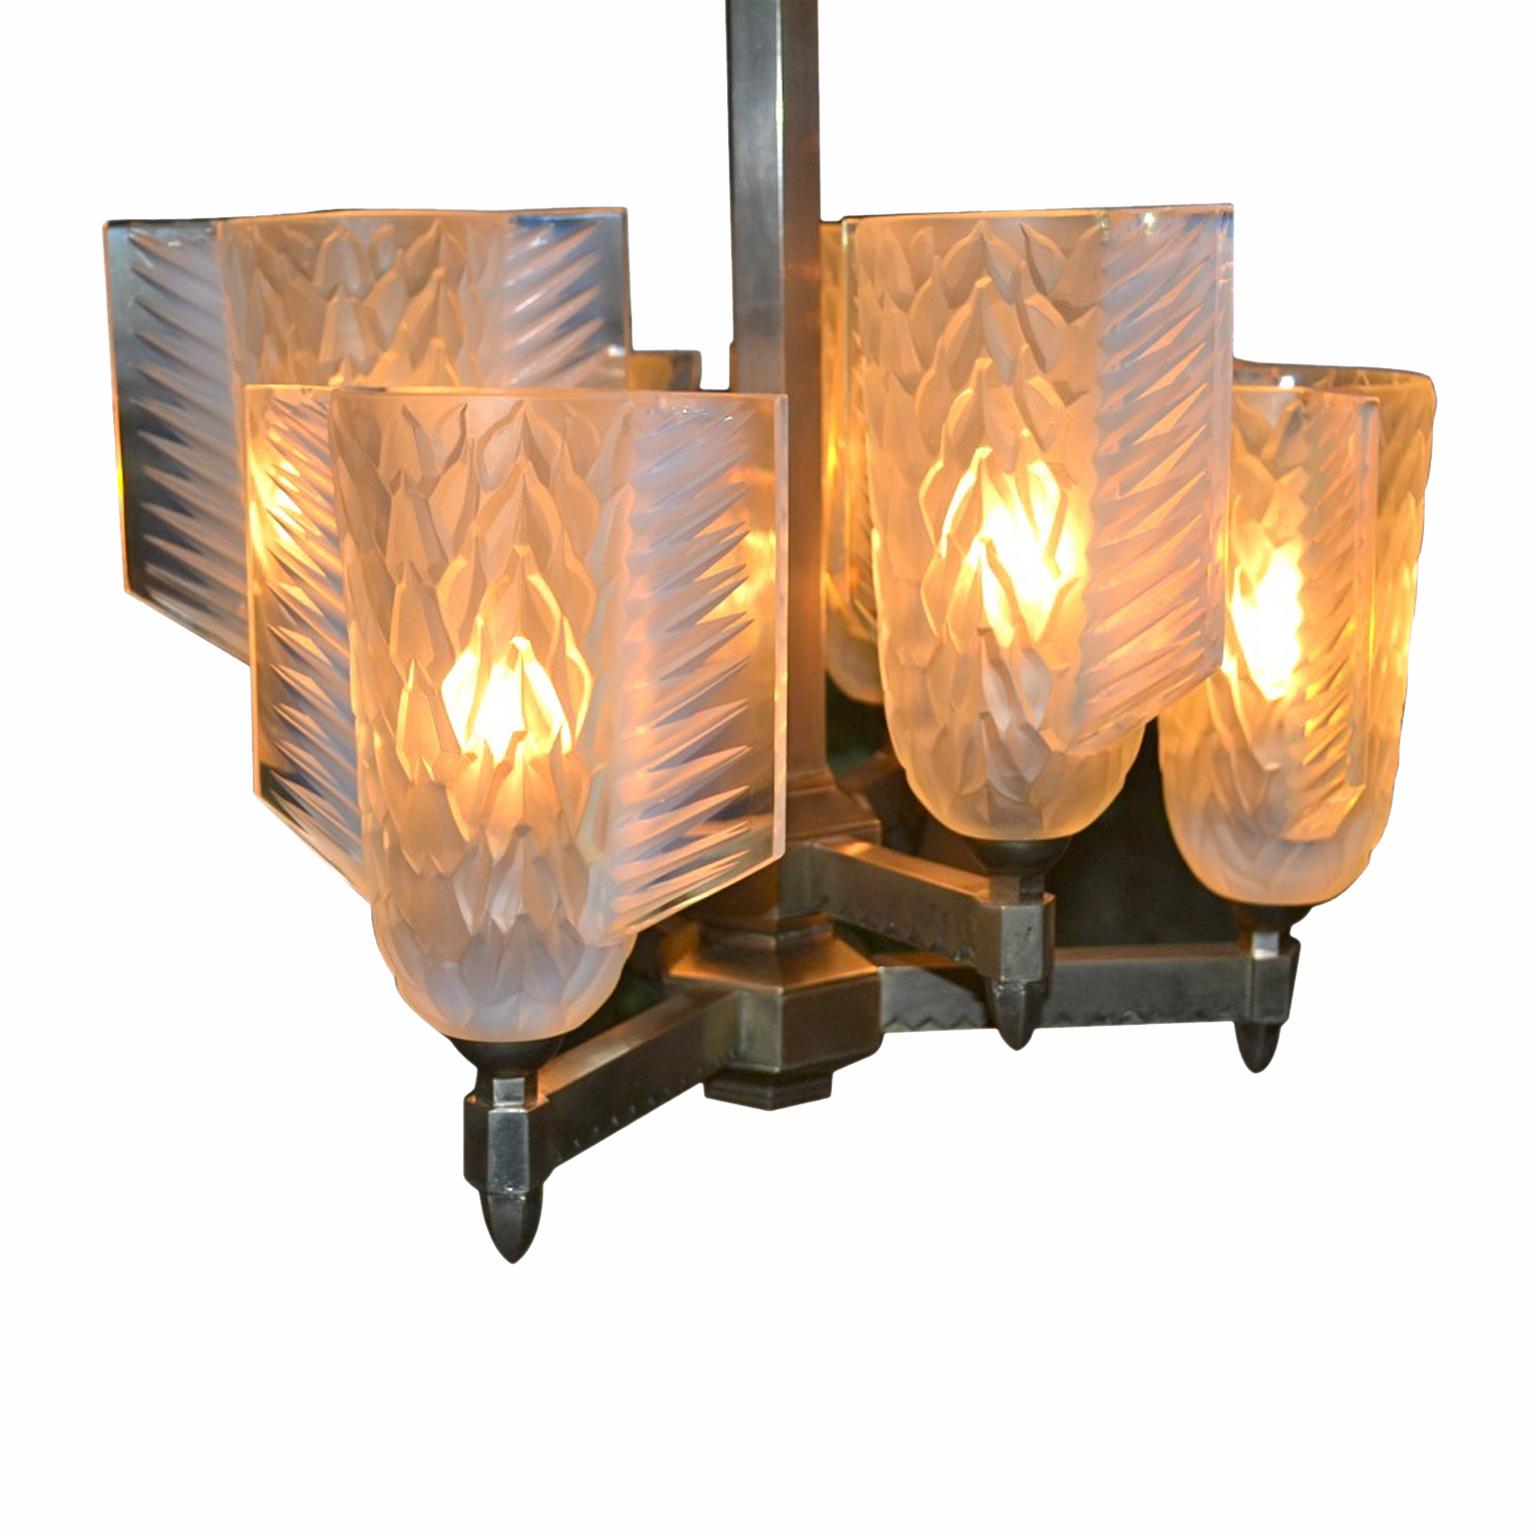 A period French Art deco chandelier; the silvered bronze frame holding two tiers of lighting; each tier has three thickly cast opalescent shades in the shape of a quiver made by Pierre D'Avesn.

Pierre Gire, aka Pierre d'Avesn, was born in 1901. At